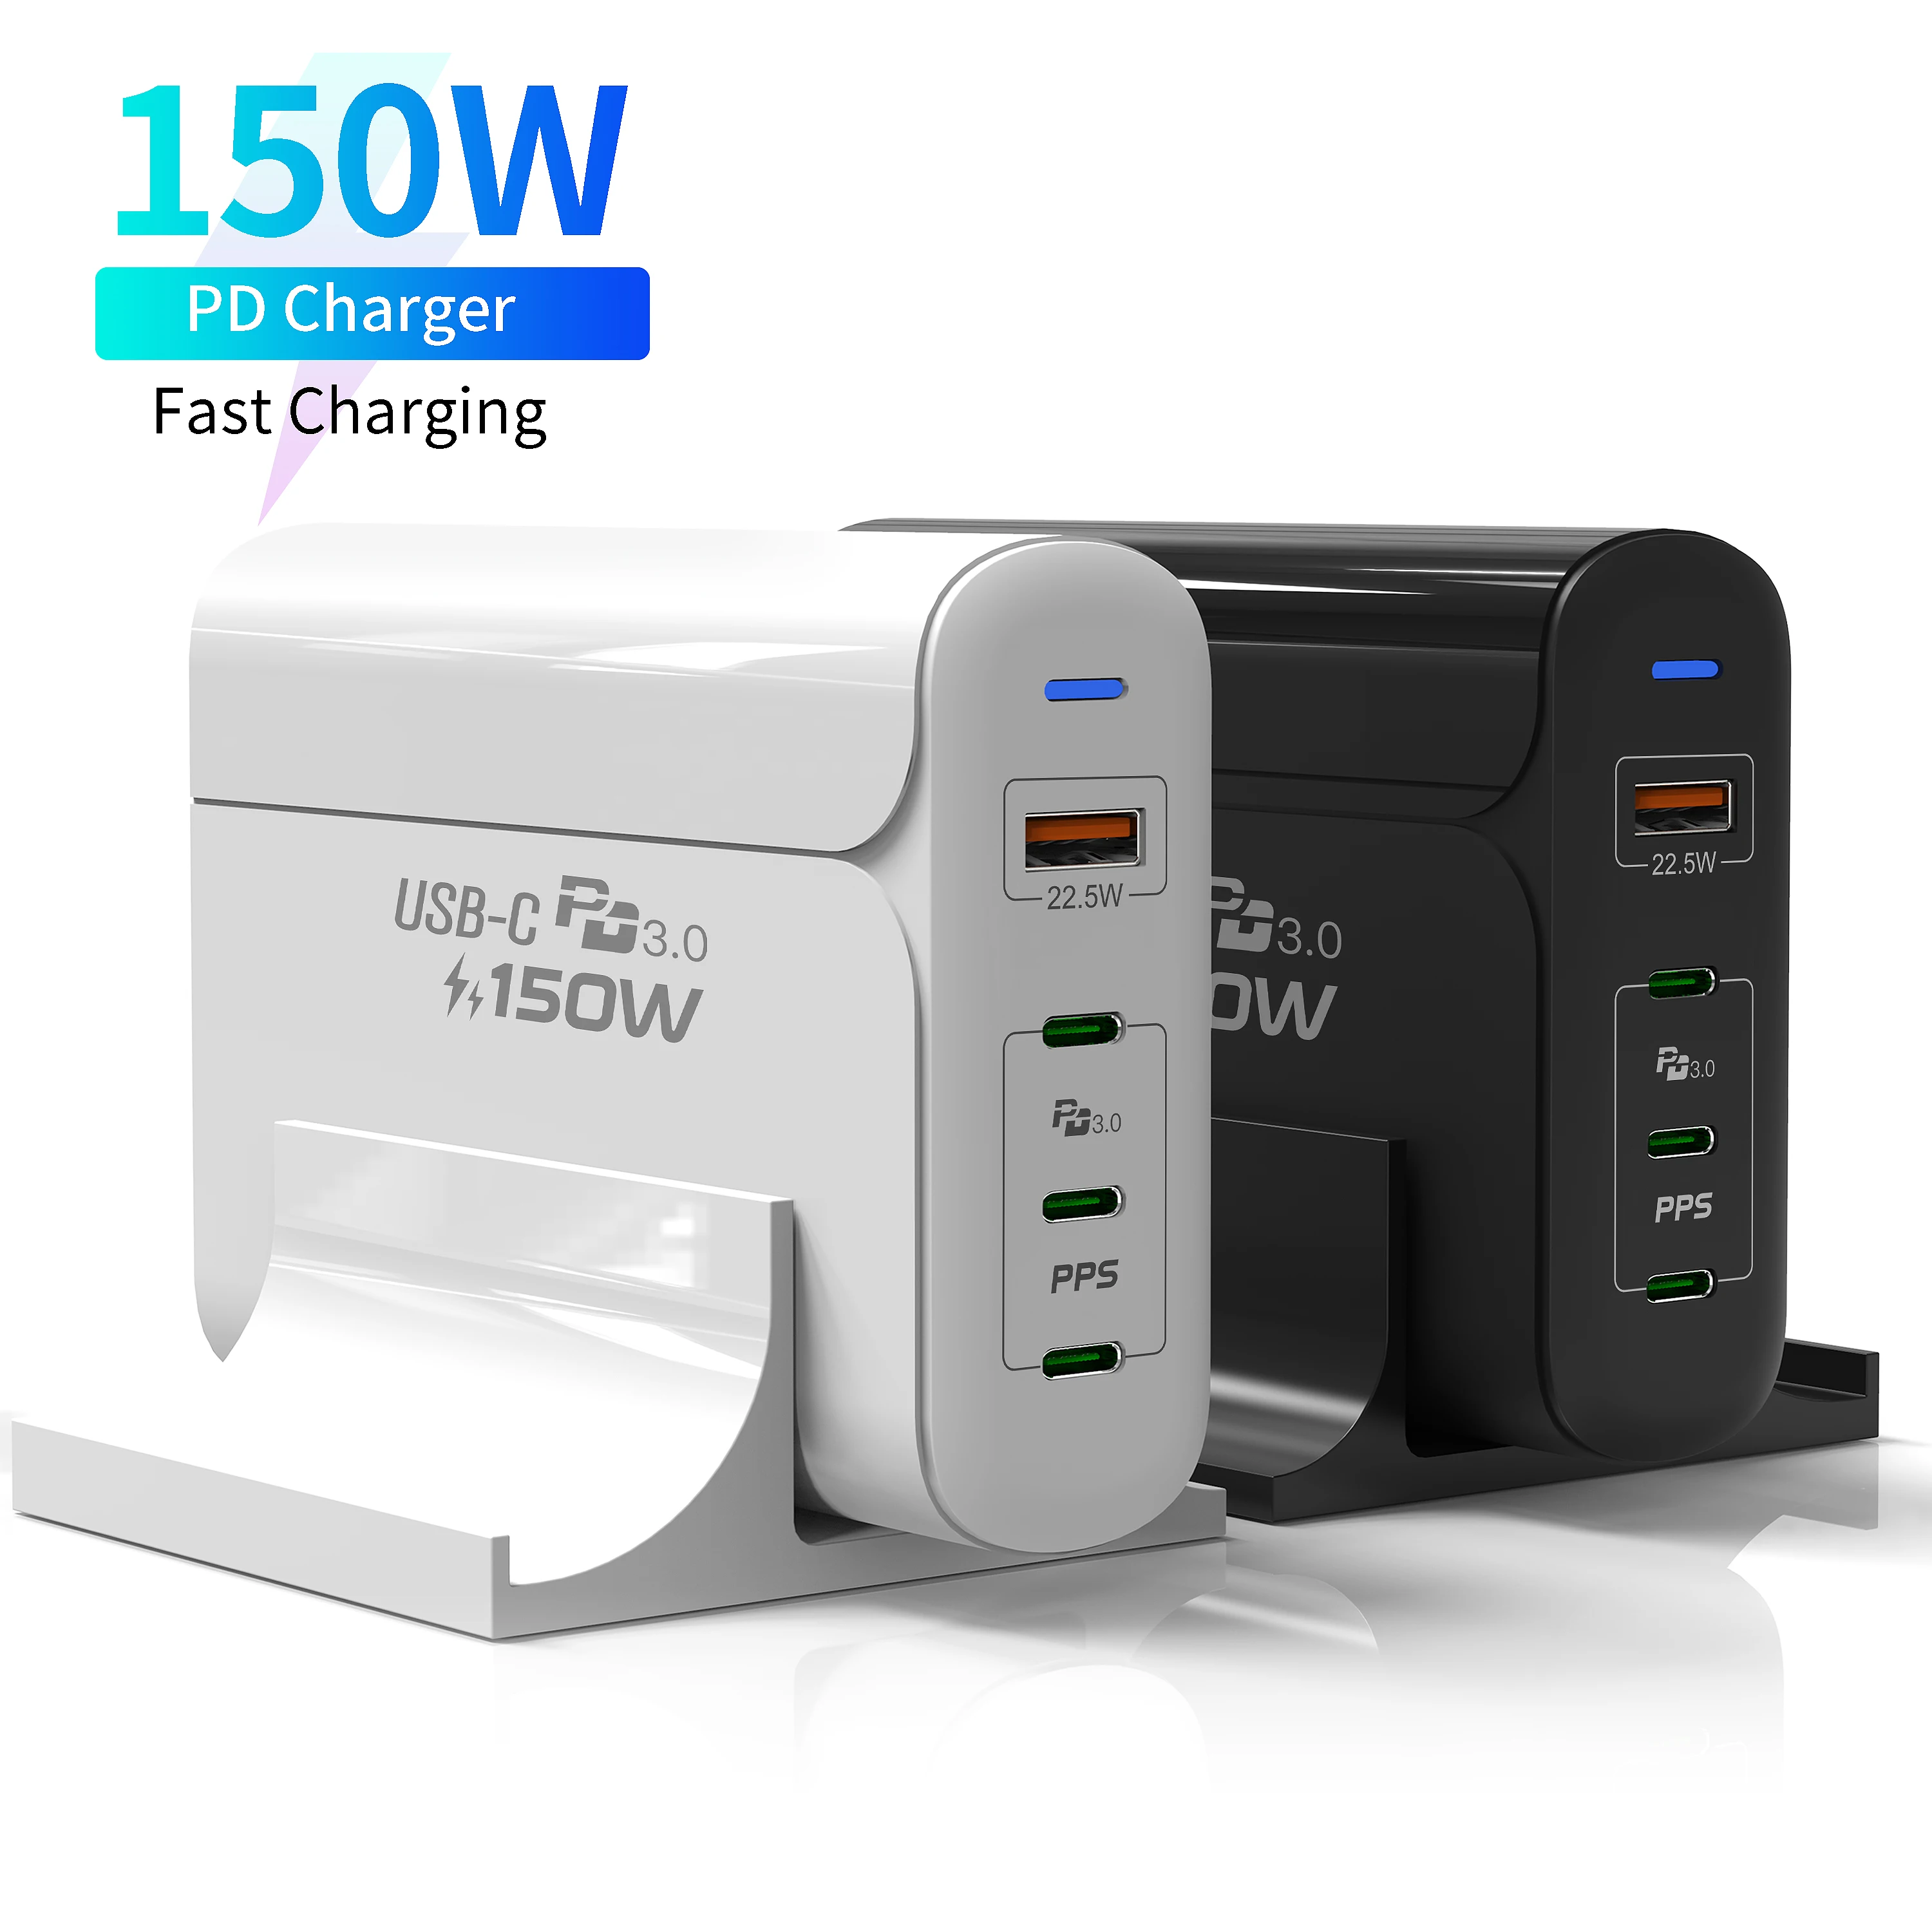 

USB Type C Laptop Charger Power Adapter,120W 5 Port USB Wall Charger with 18W & 60W Type C Power Delivery PD Charger and QC 4.0